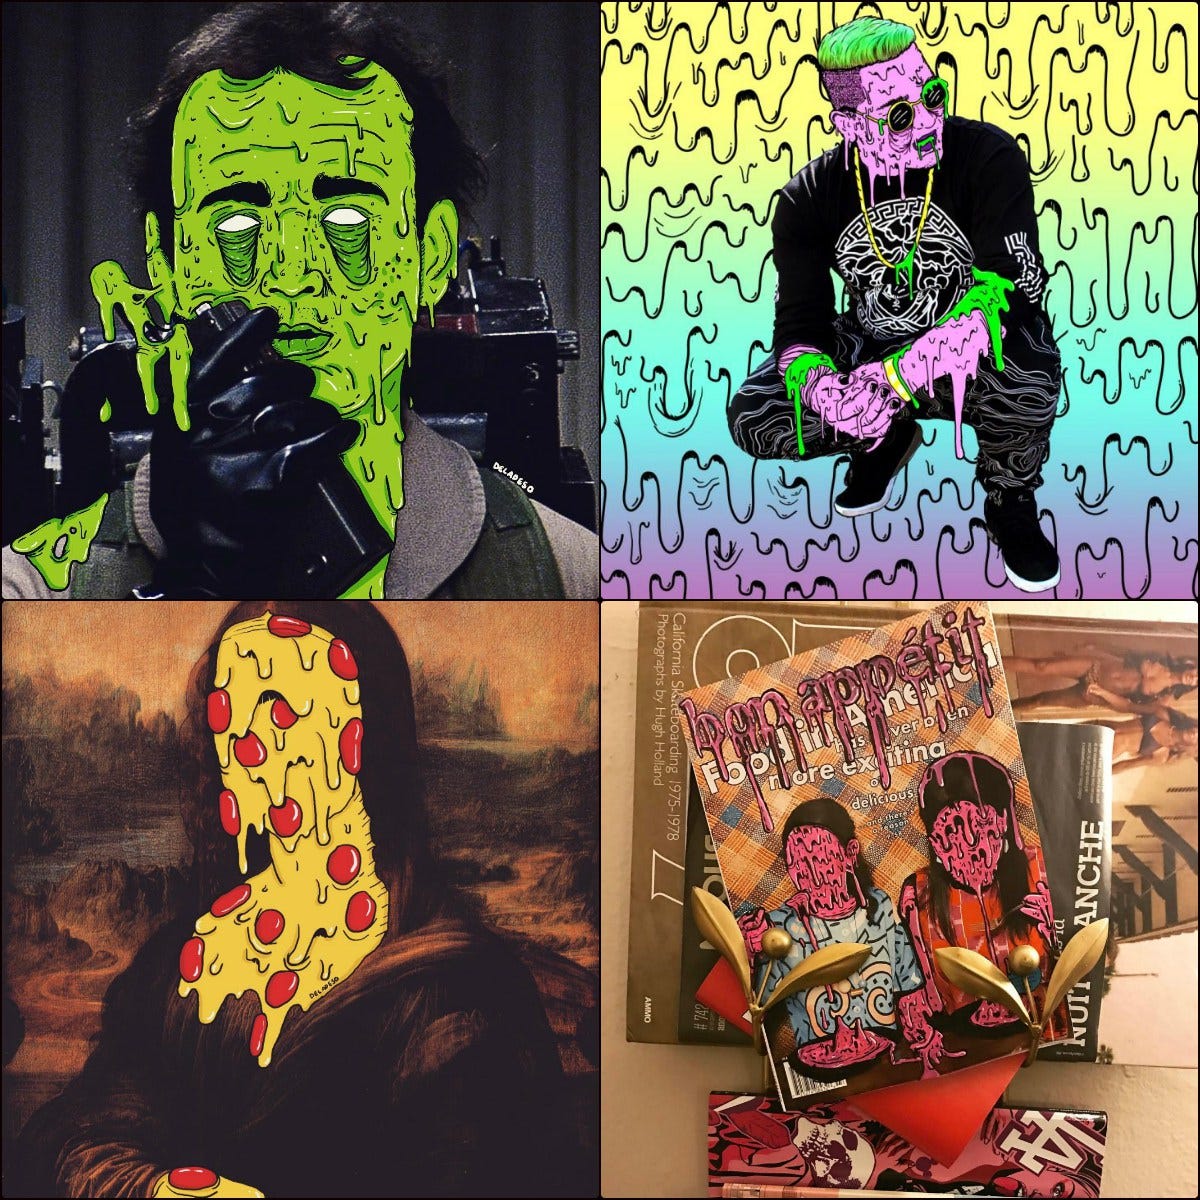 What The Heck Is Grime Art And Why Are People Making It By Eric Suesz Sketchbook In Perspective Medium